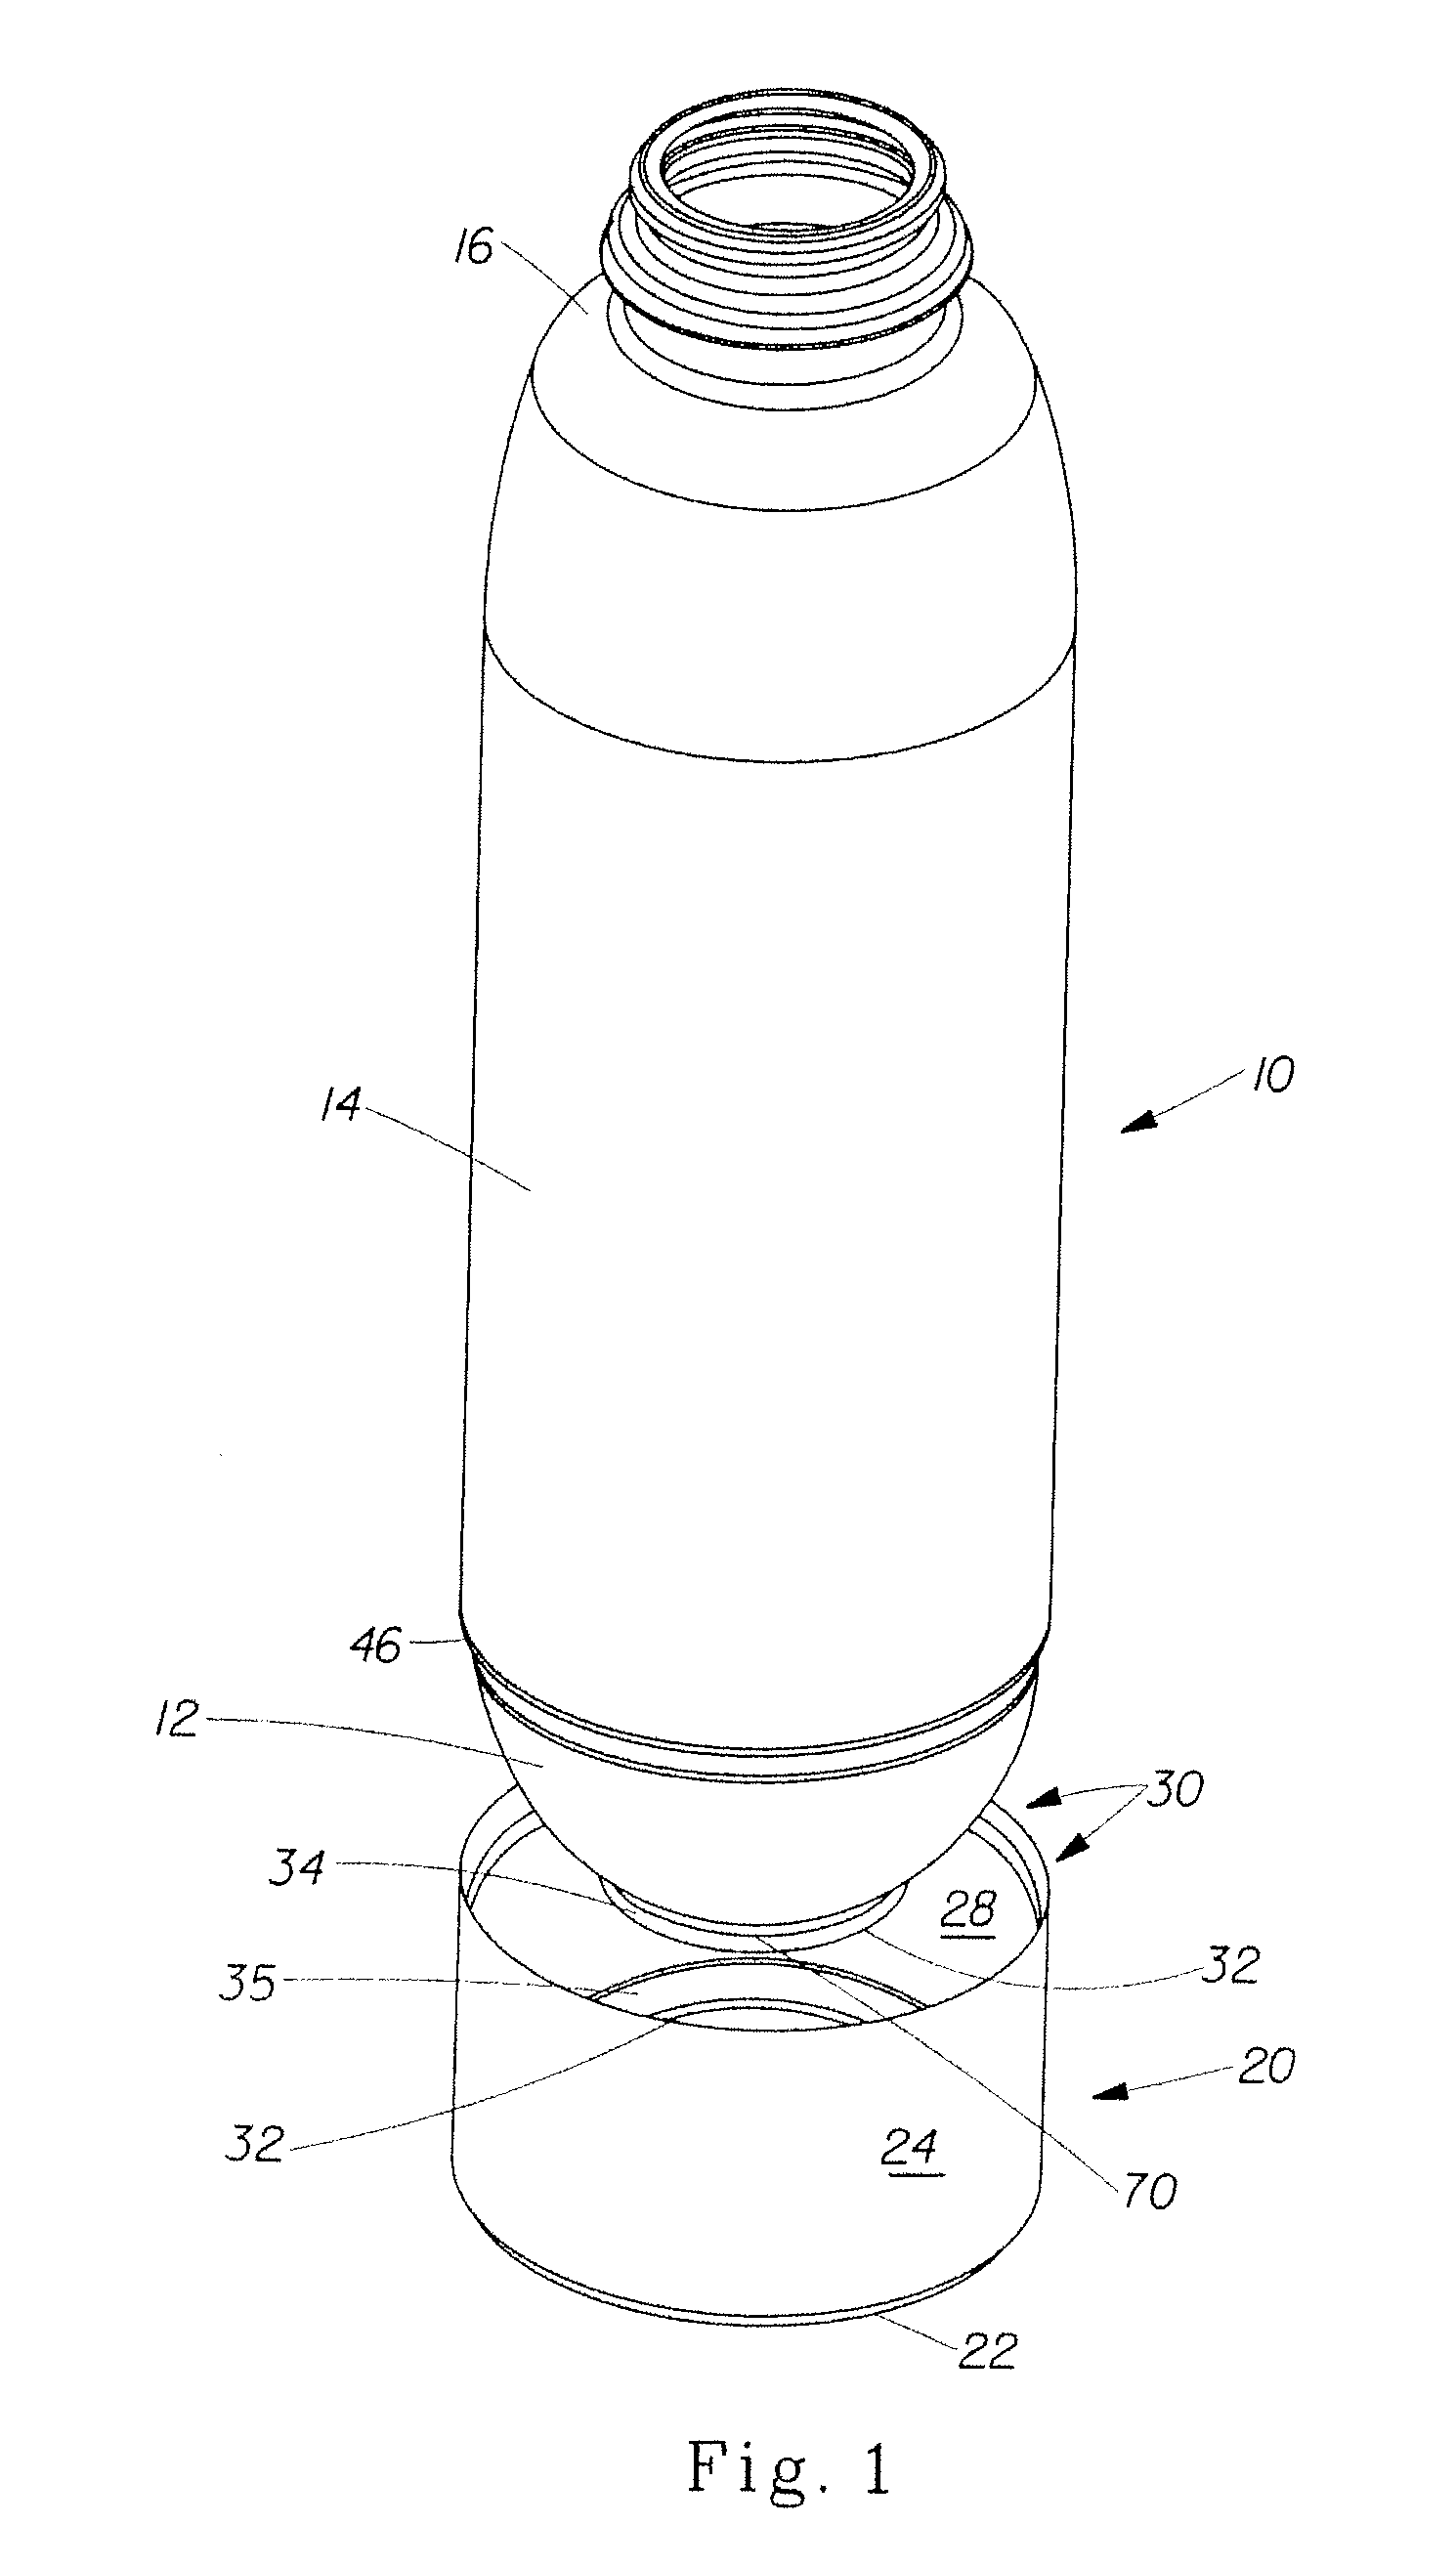 Supportable Pressurizable Container having a Bottom for Receiving a Dip Tube and Base Cup Therefor